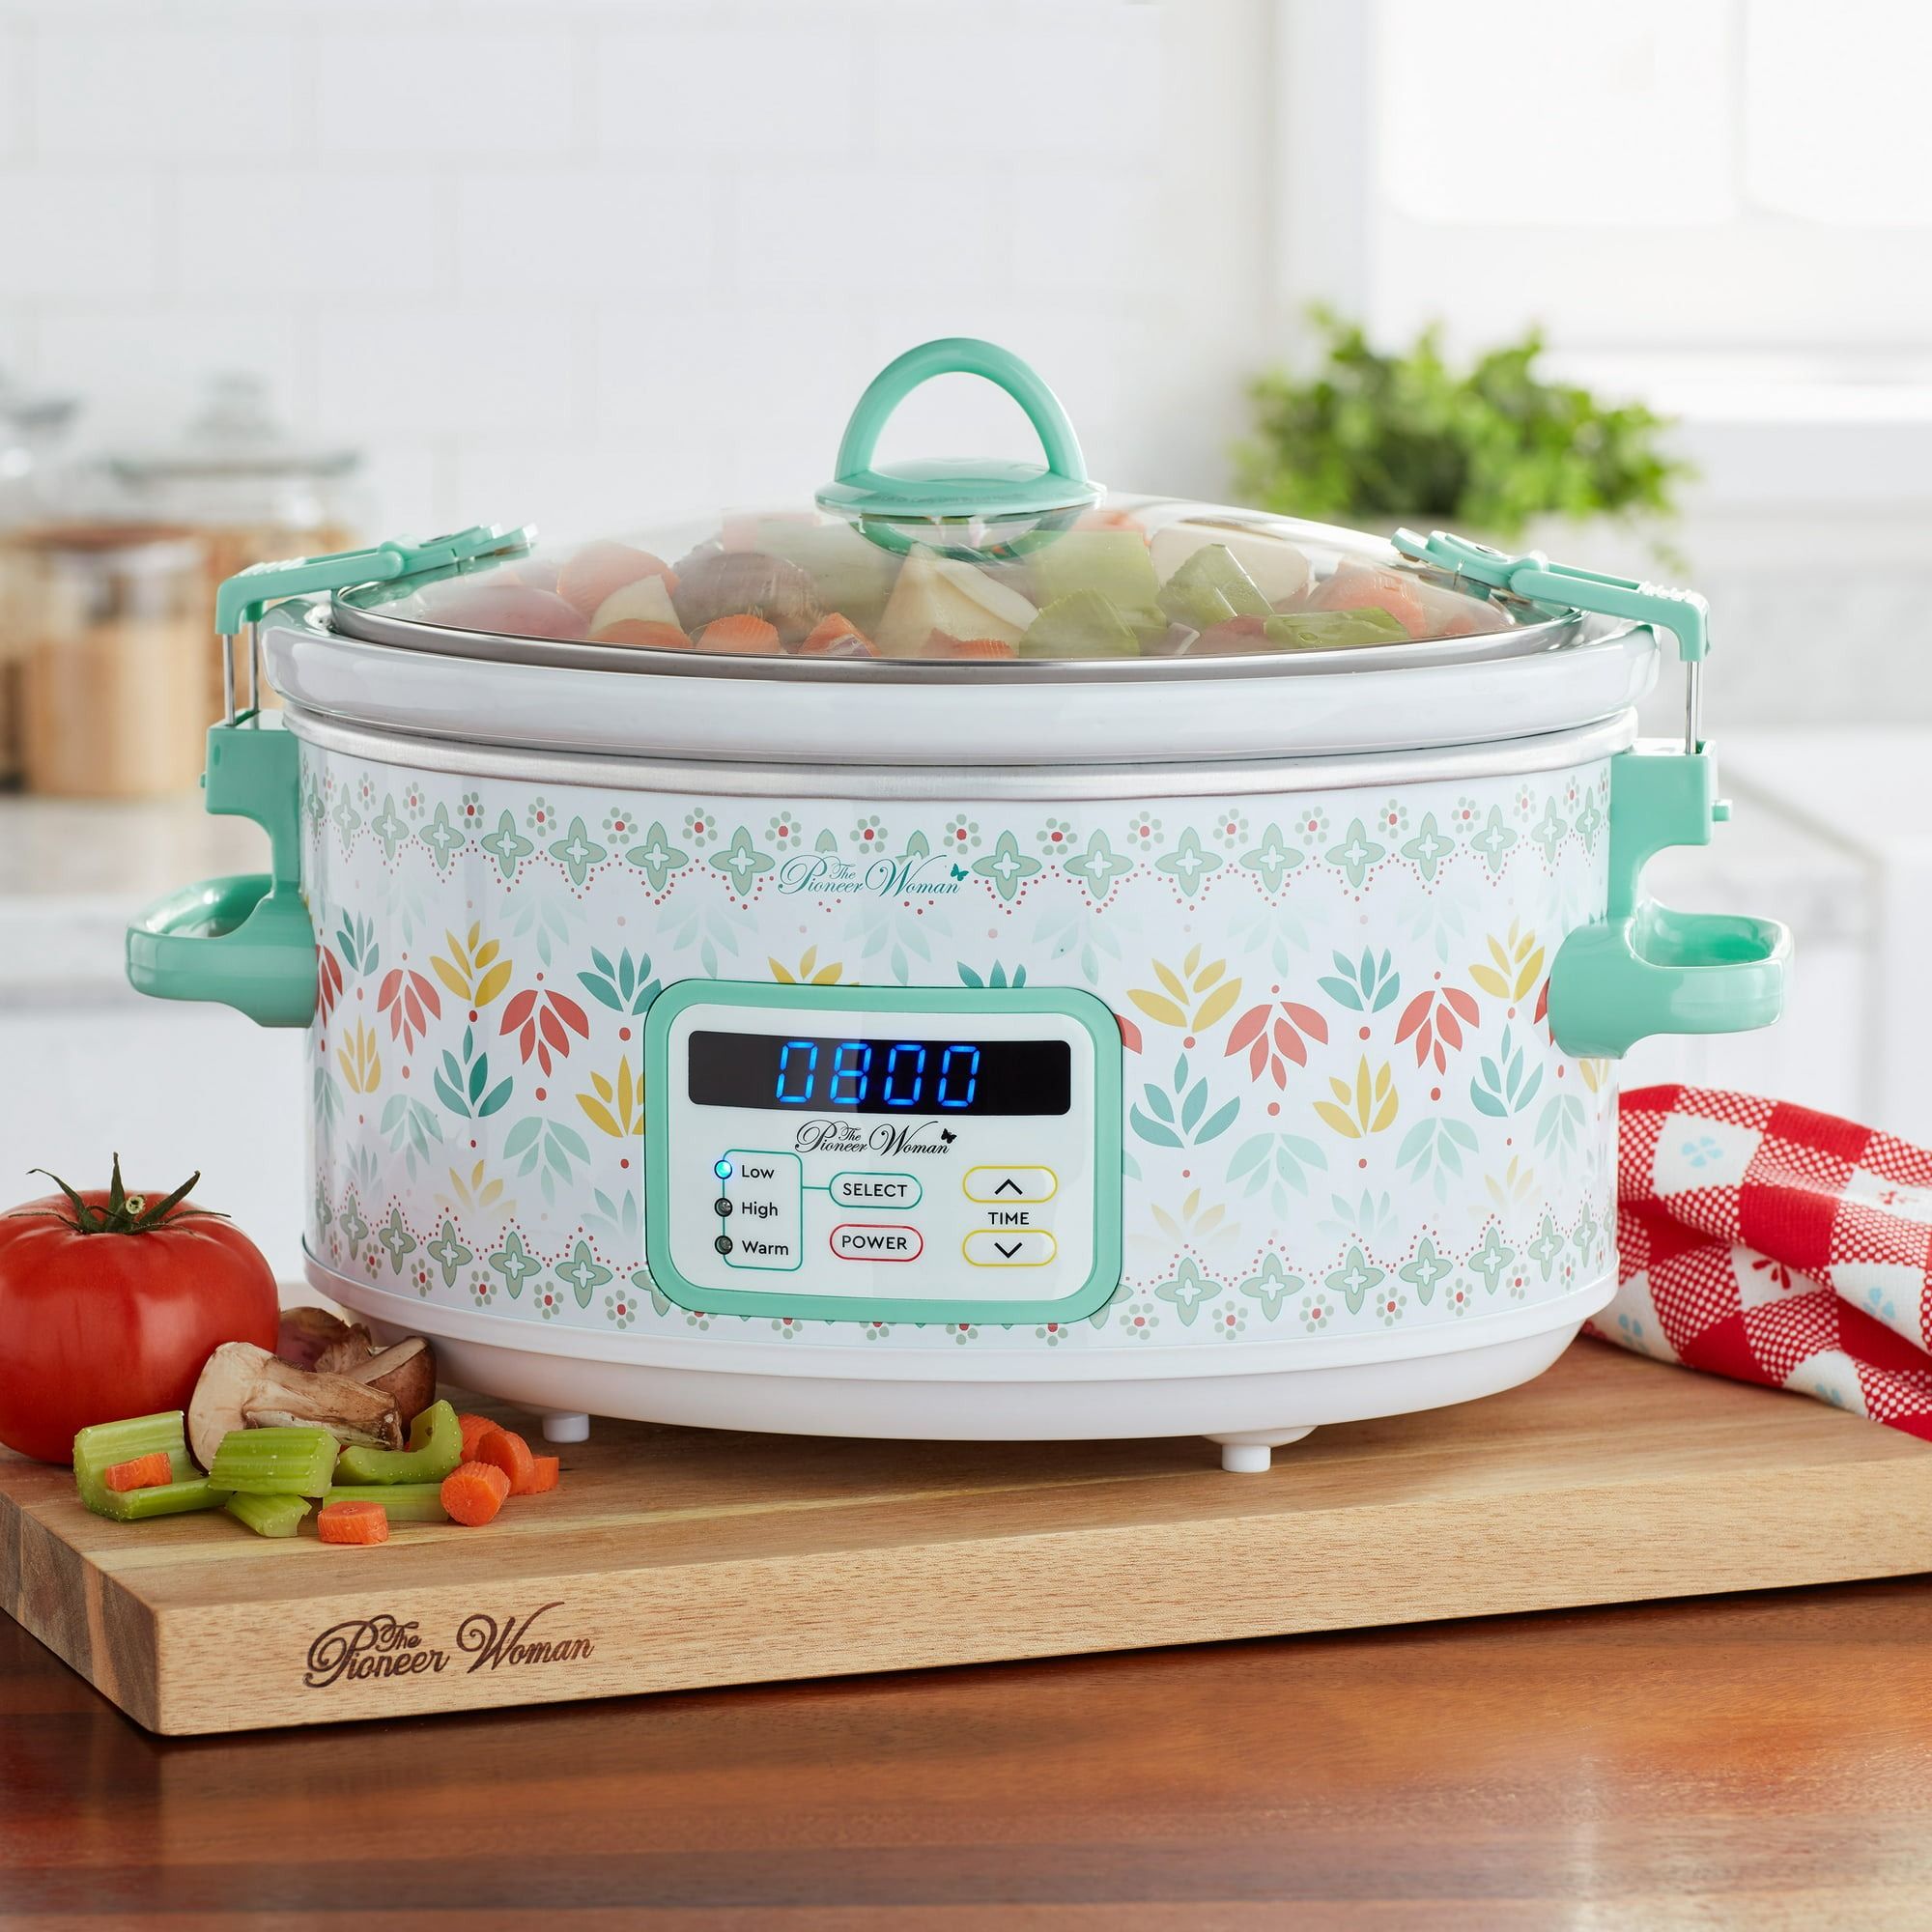 The Pioneer Woman Under Is Walmart $40 Slow Cooker at